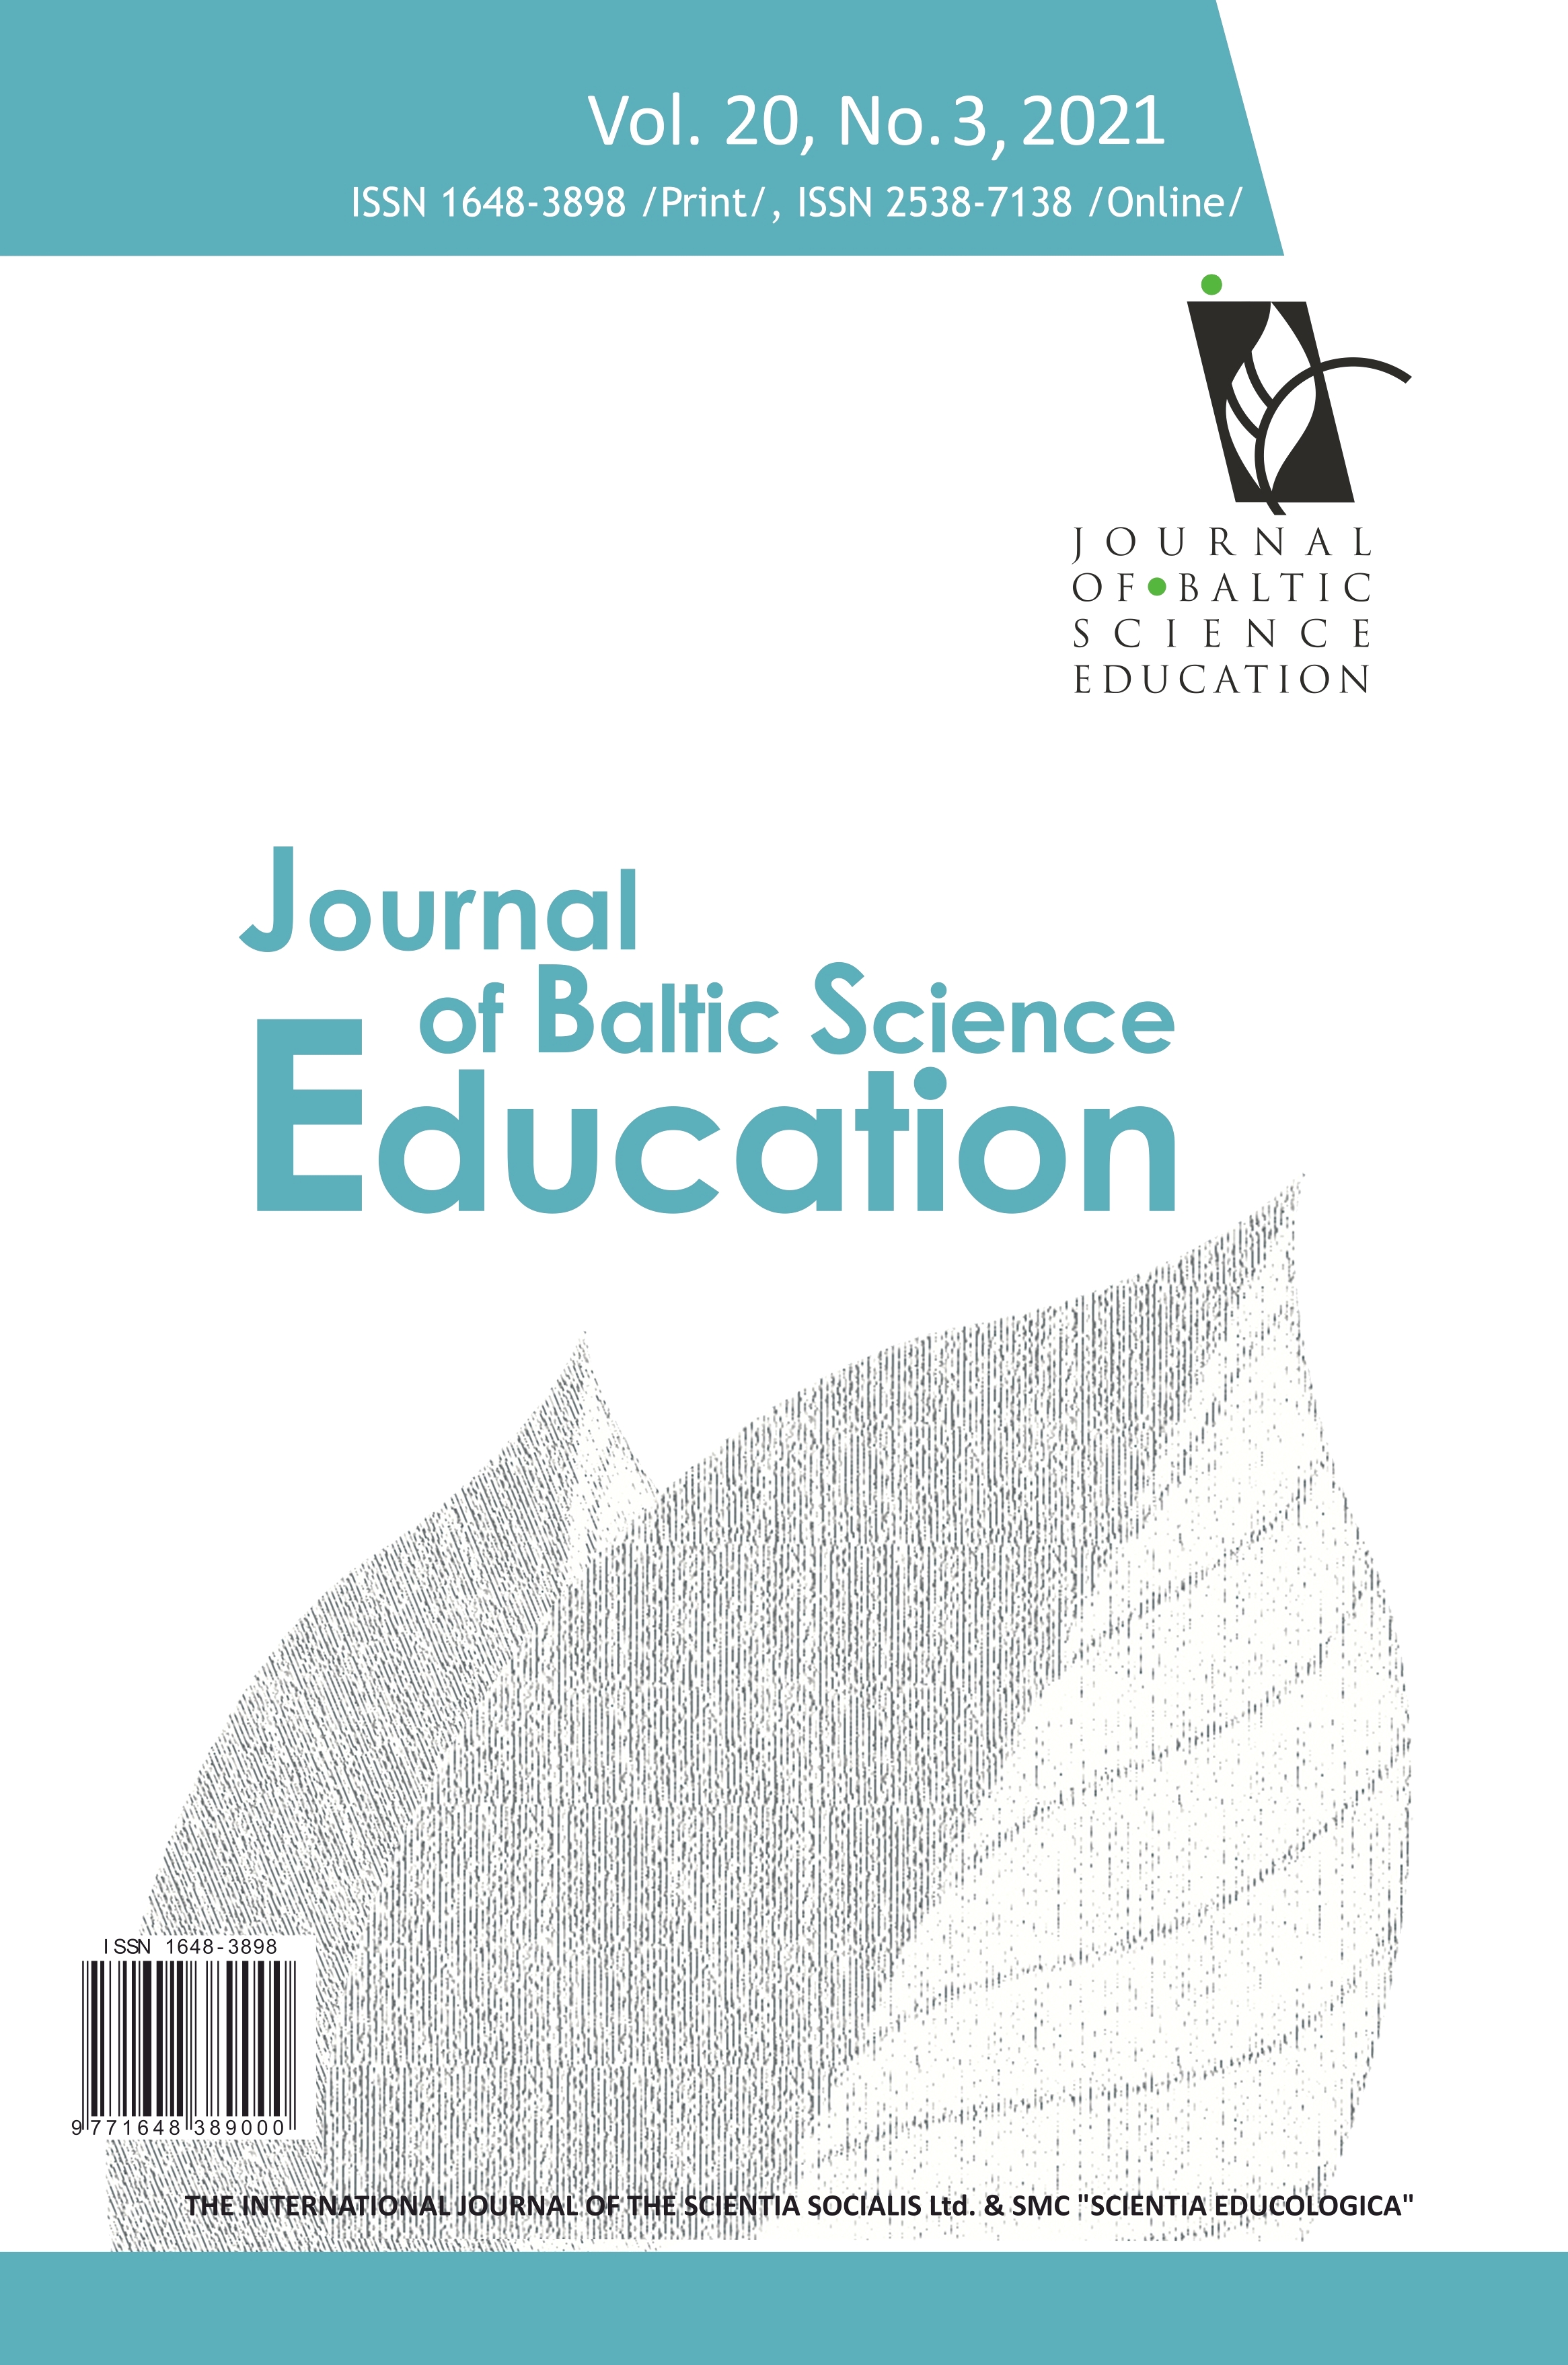 CONCEPTIONS OF LEARNING SCIENCE IN INFORMAL ENVIRONMENTS AMONG PRIMARY SCHOOL STUDENTS IN MAINLAND CHINA Cover Image